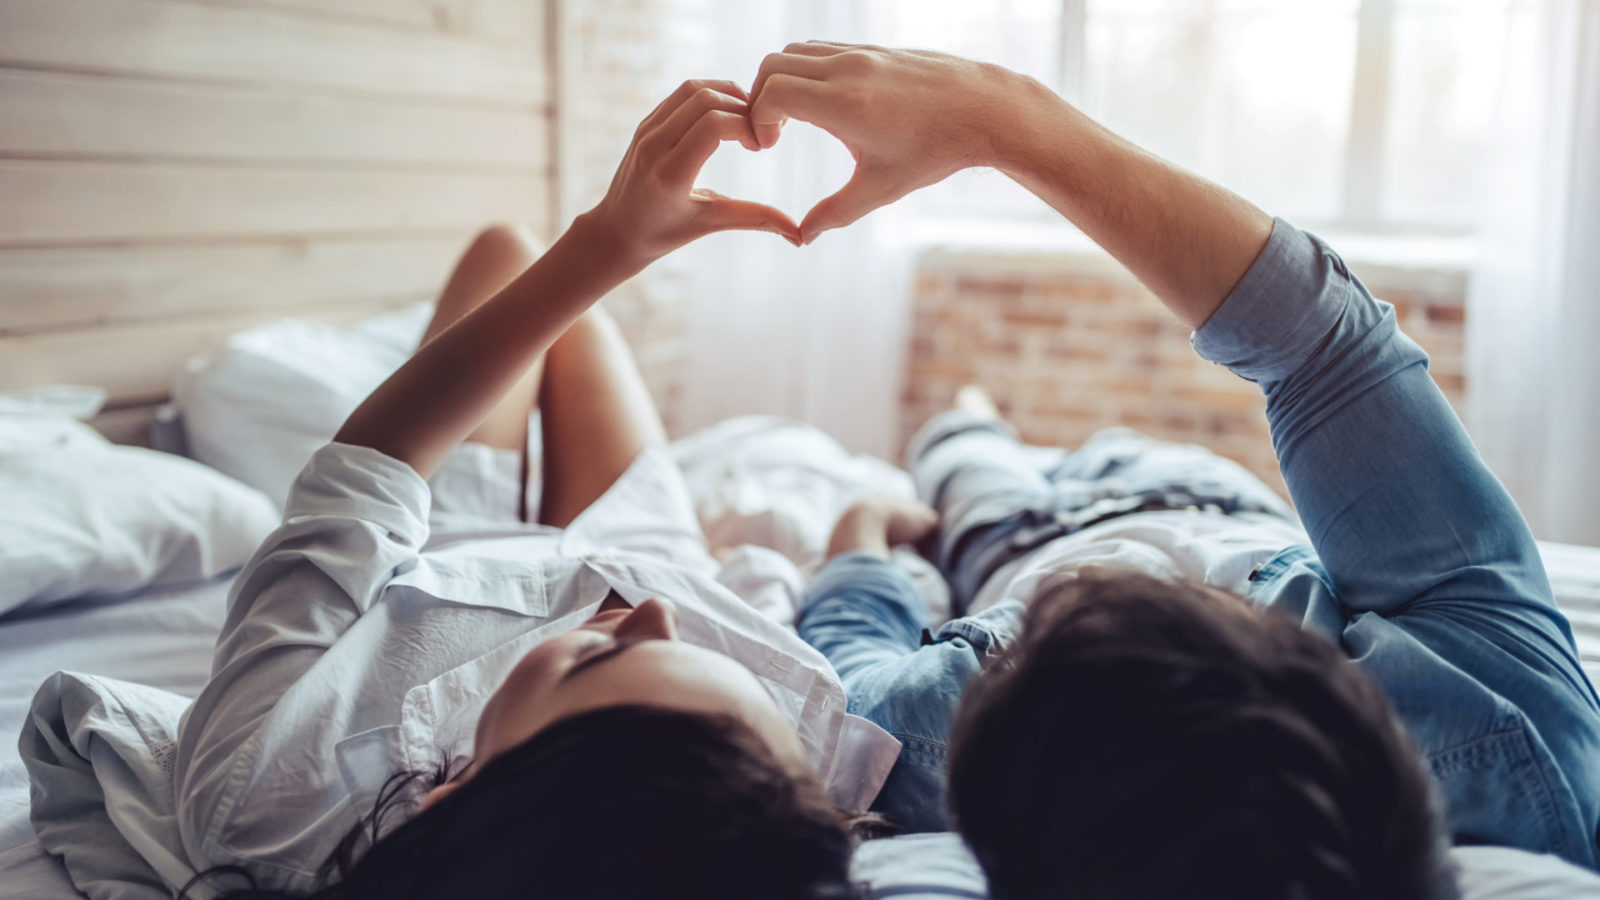 Couple-laying-on-bed-making-heart-shape-with-hands-trying-to-get-pregnant